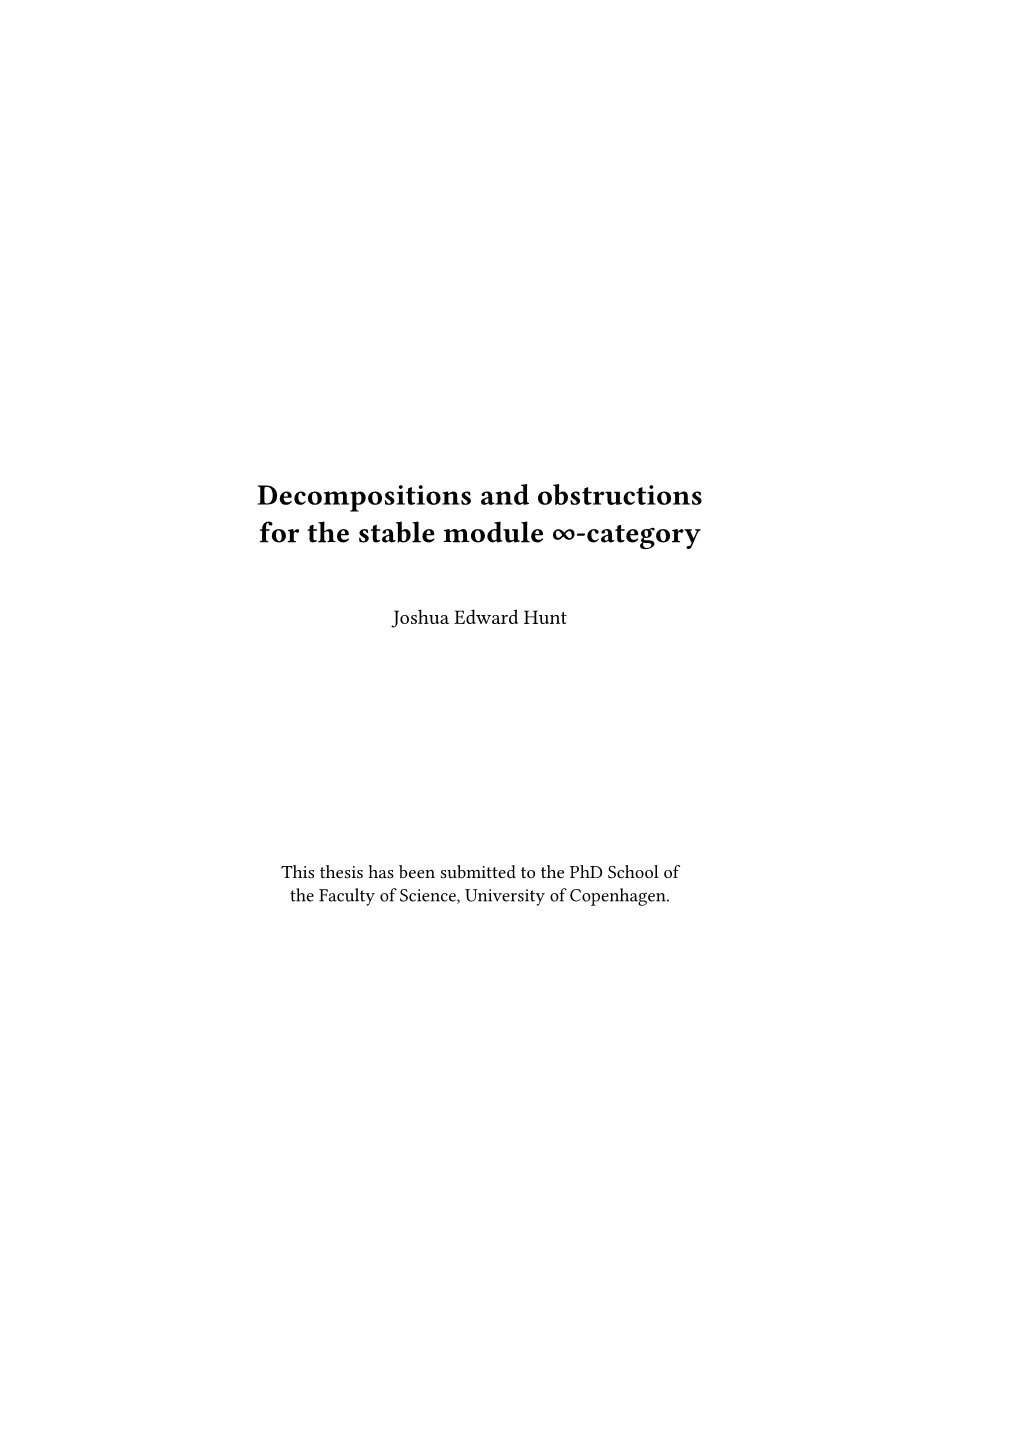 Decompositions and Obstructions for the Stable Module ∞-Category